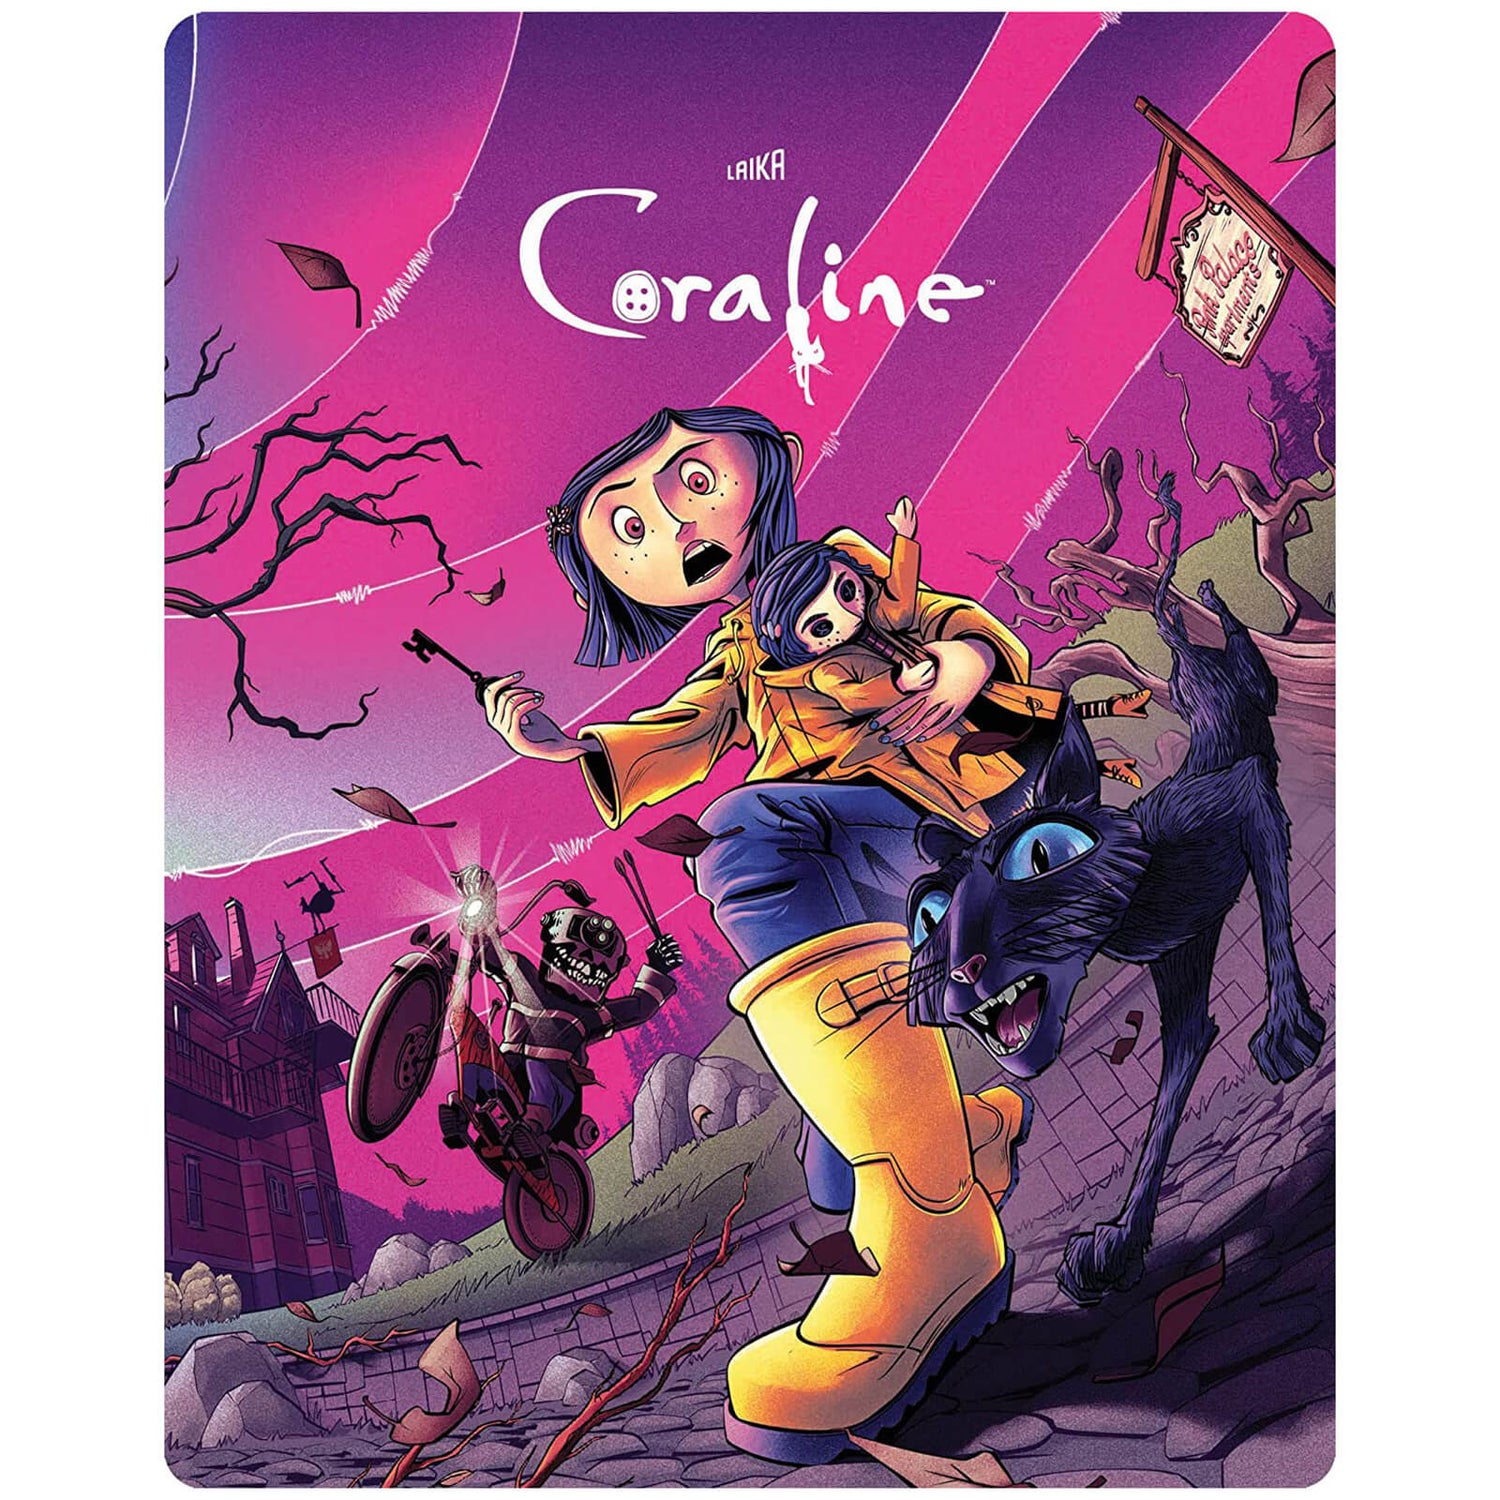 Coraline 4K Ultra HD Limited Edition Steelbook (Includes Blu-ray)